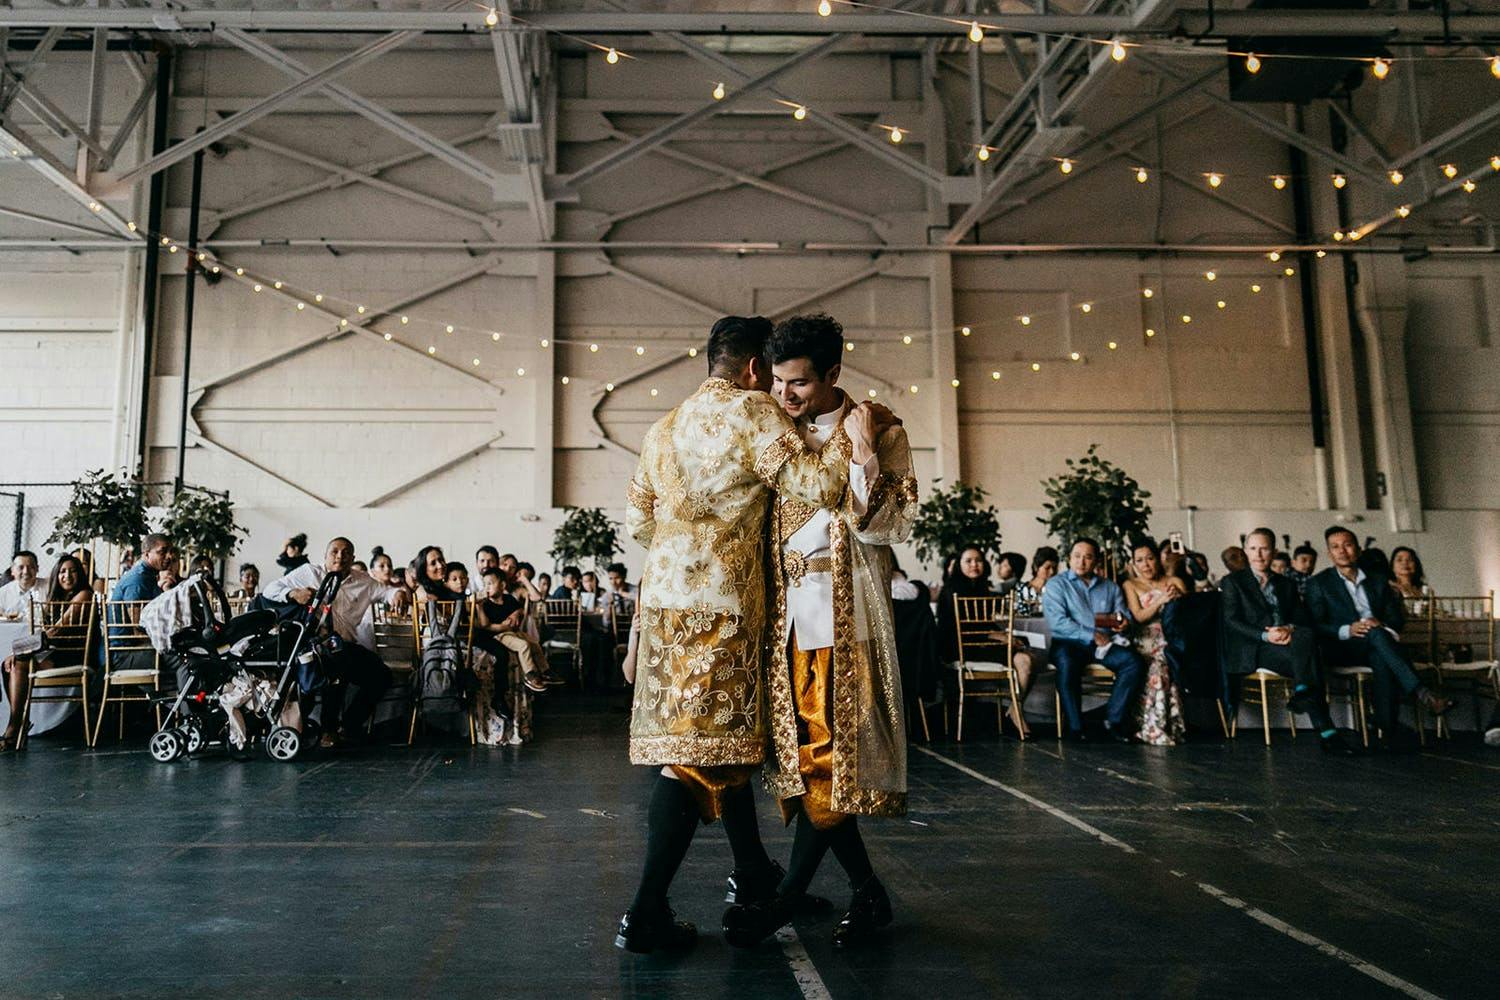 Two grooms dance in Cambodian attire at industrial-chic wedding | PartySlate